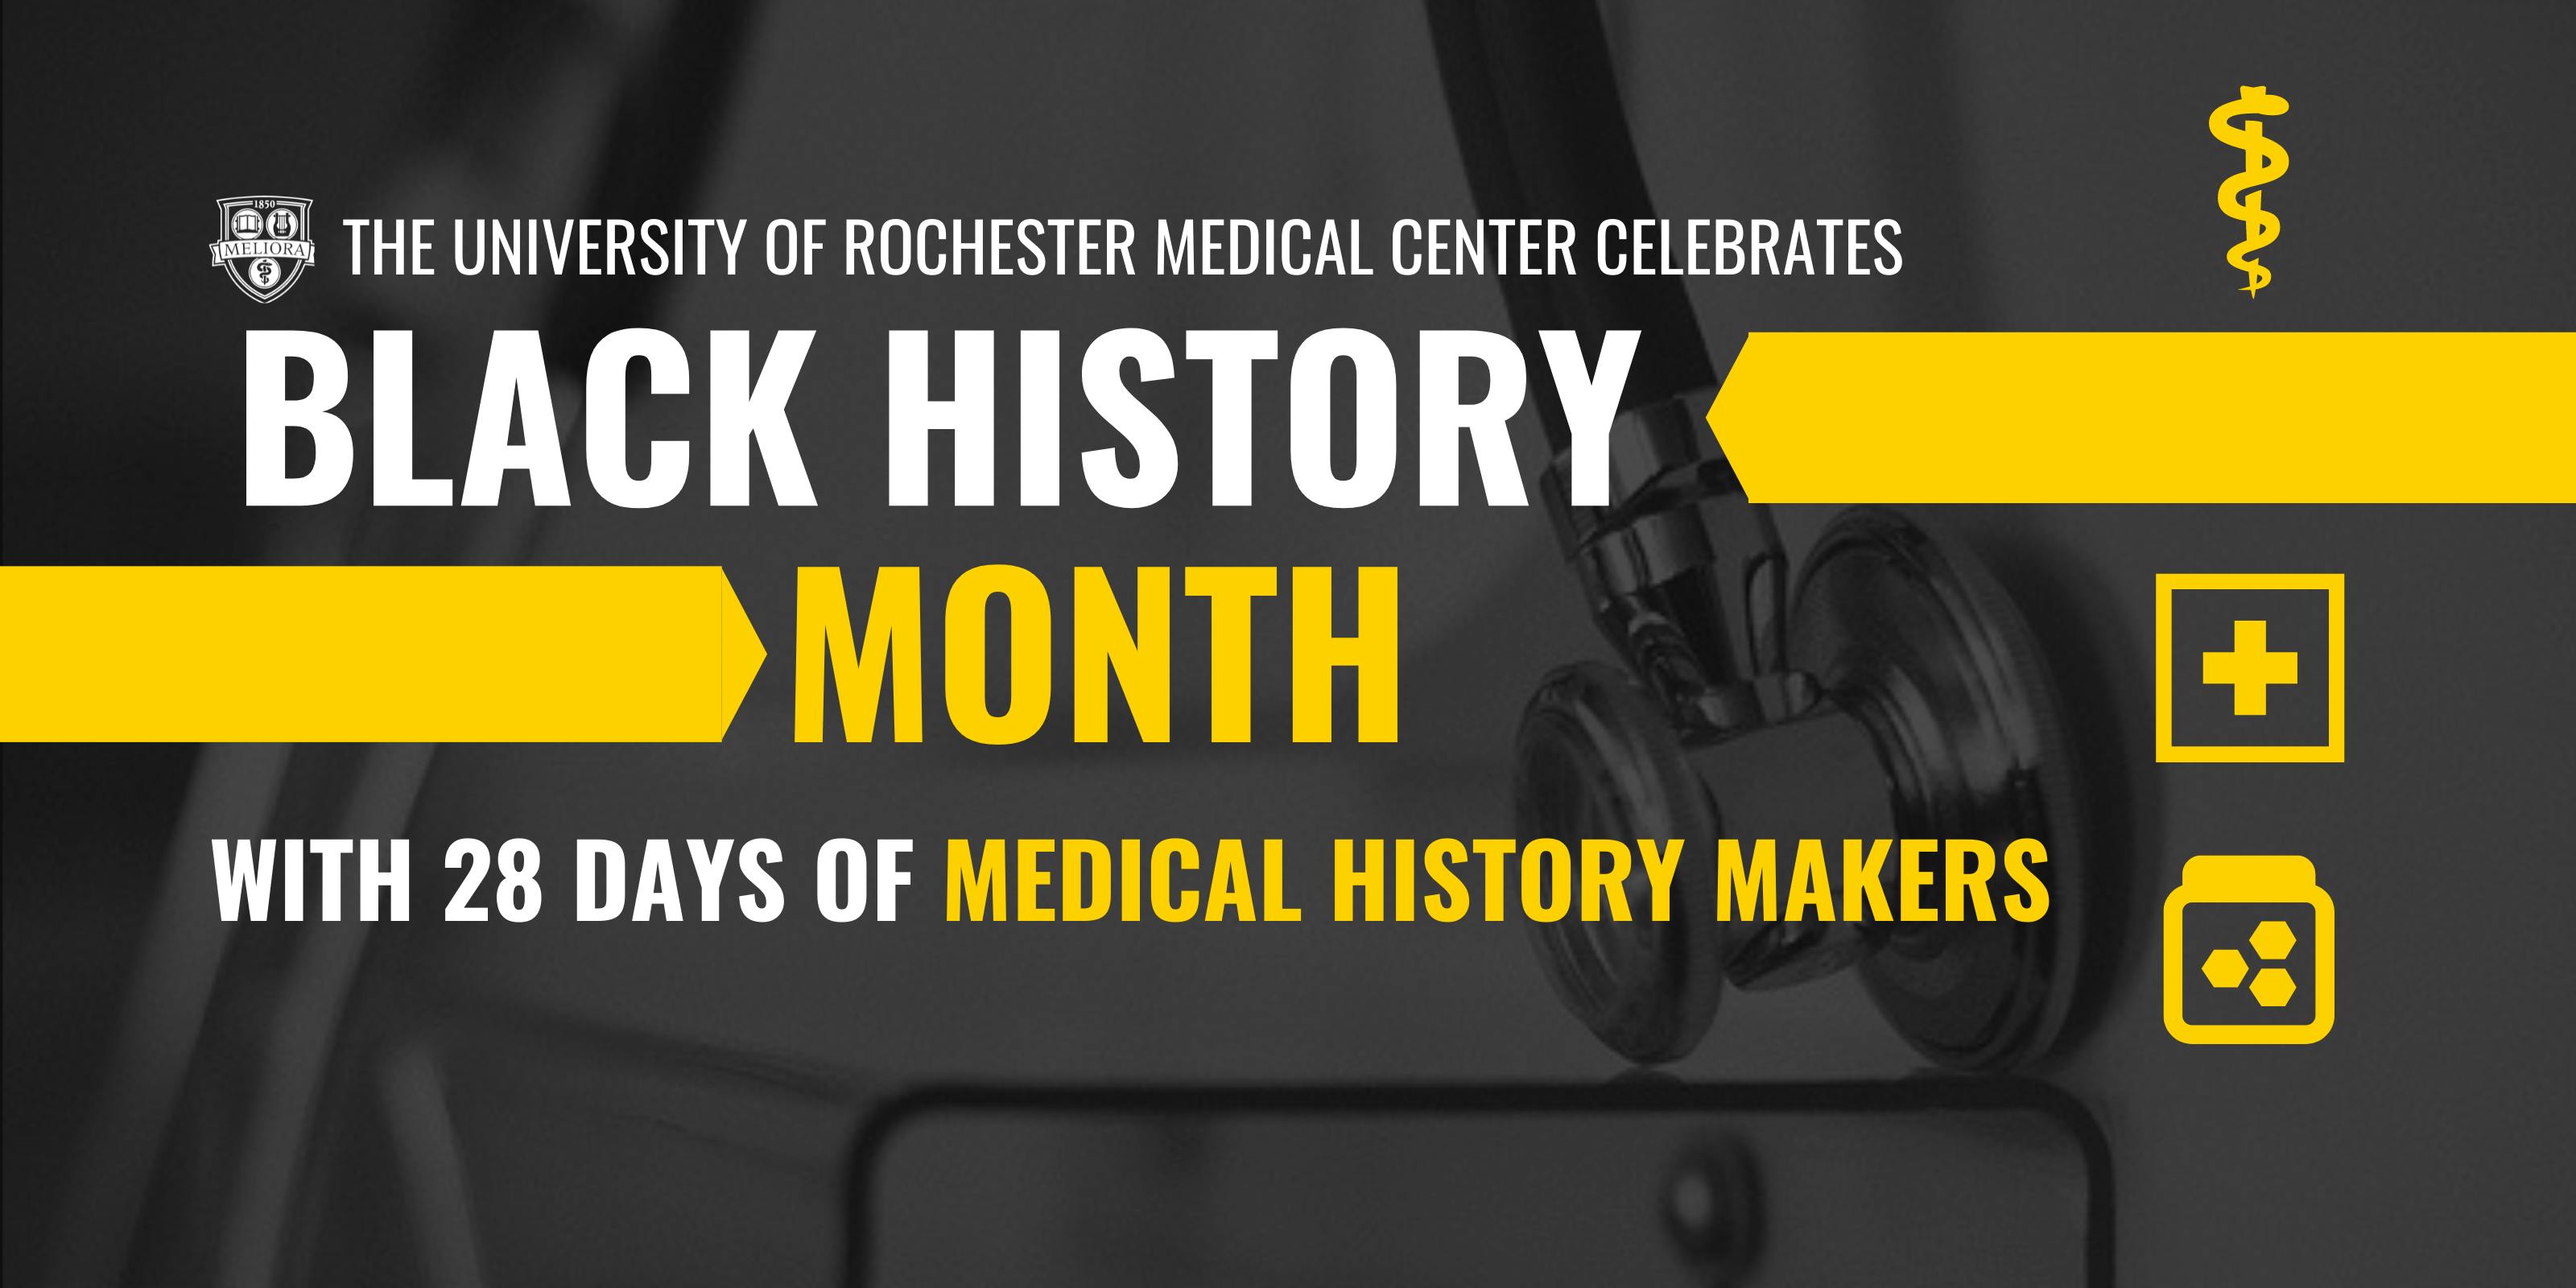 URMC Celebrates Black History Month with 28 Days of Medical History Makers